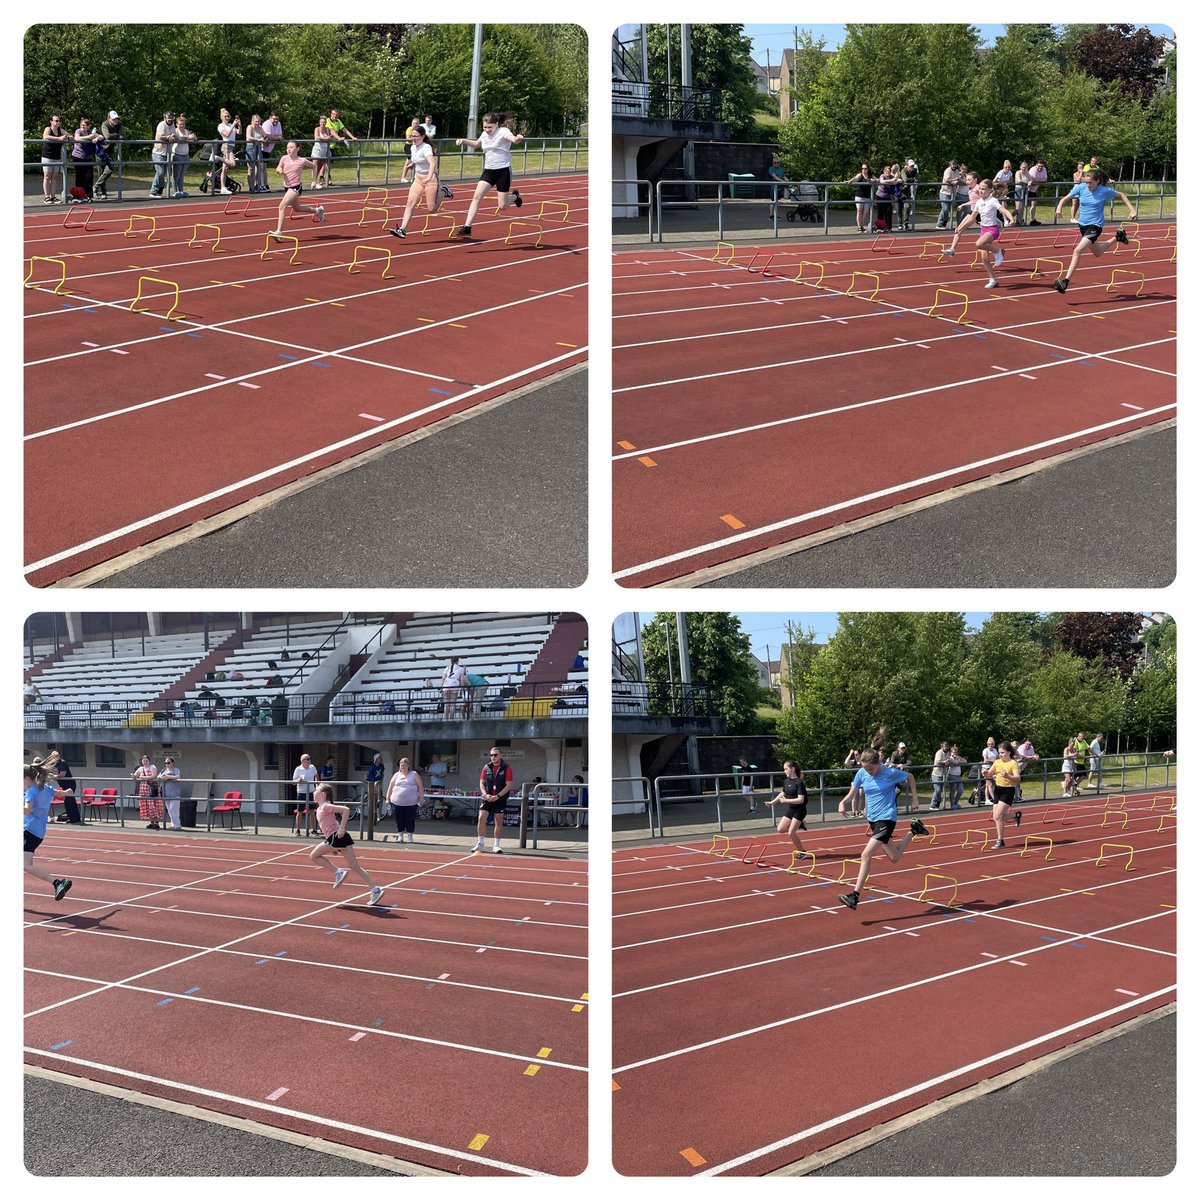 More photos of our amazing sport’s day🏃‍♀️⭐️@BonarMrs